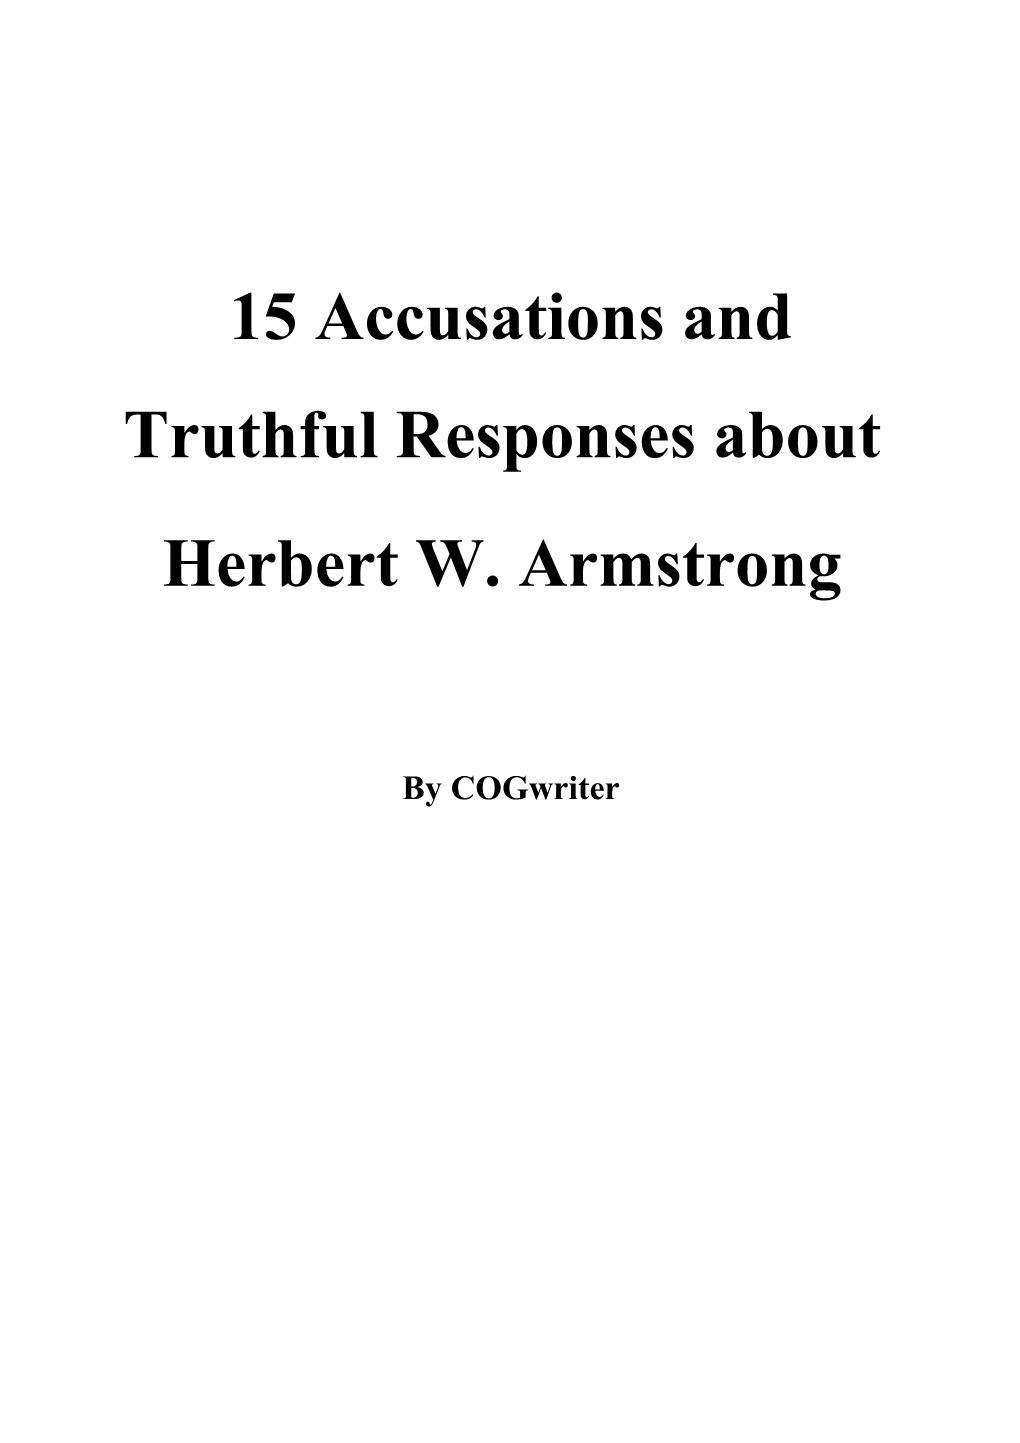 15 Accusations and Truthful Responses About